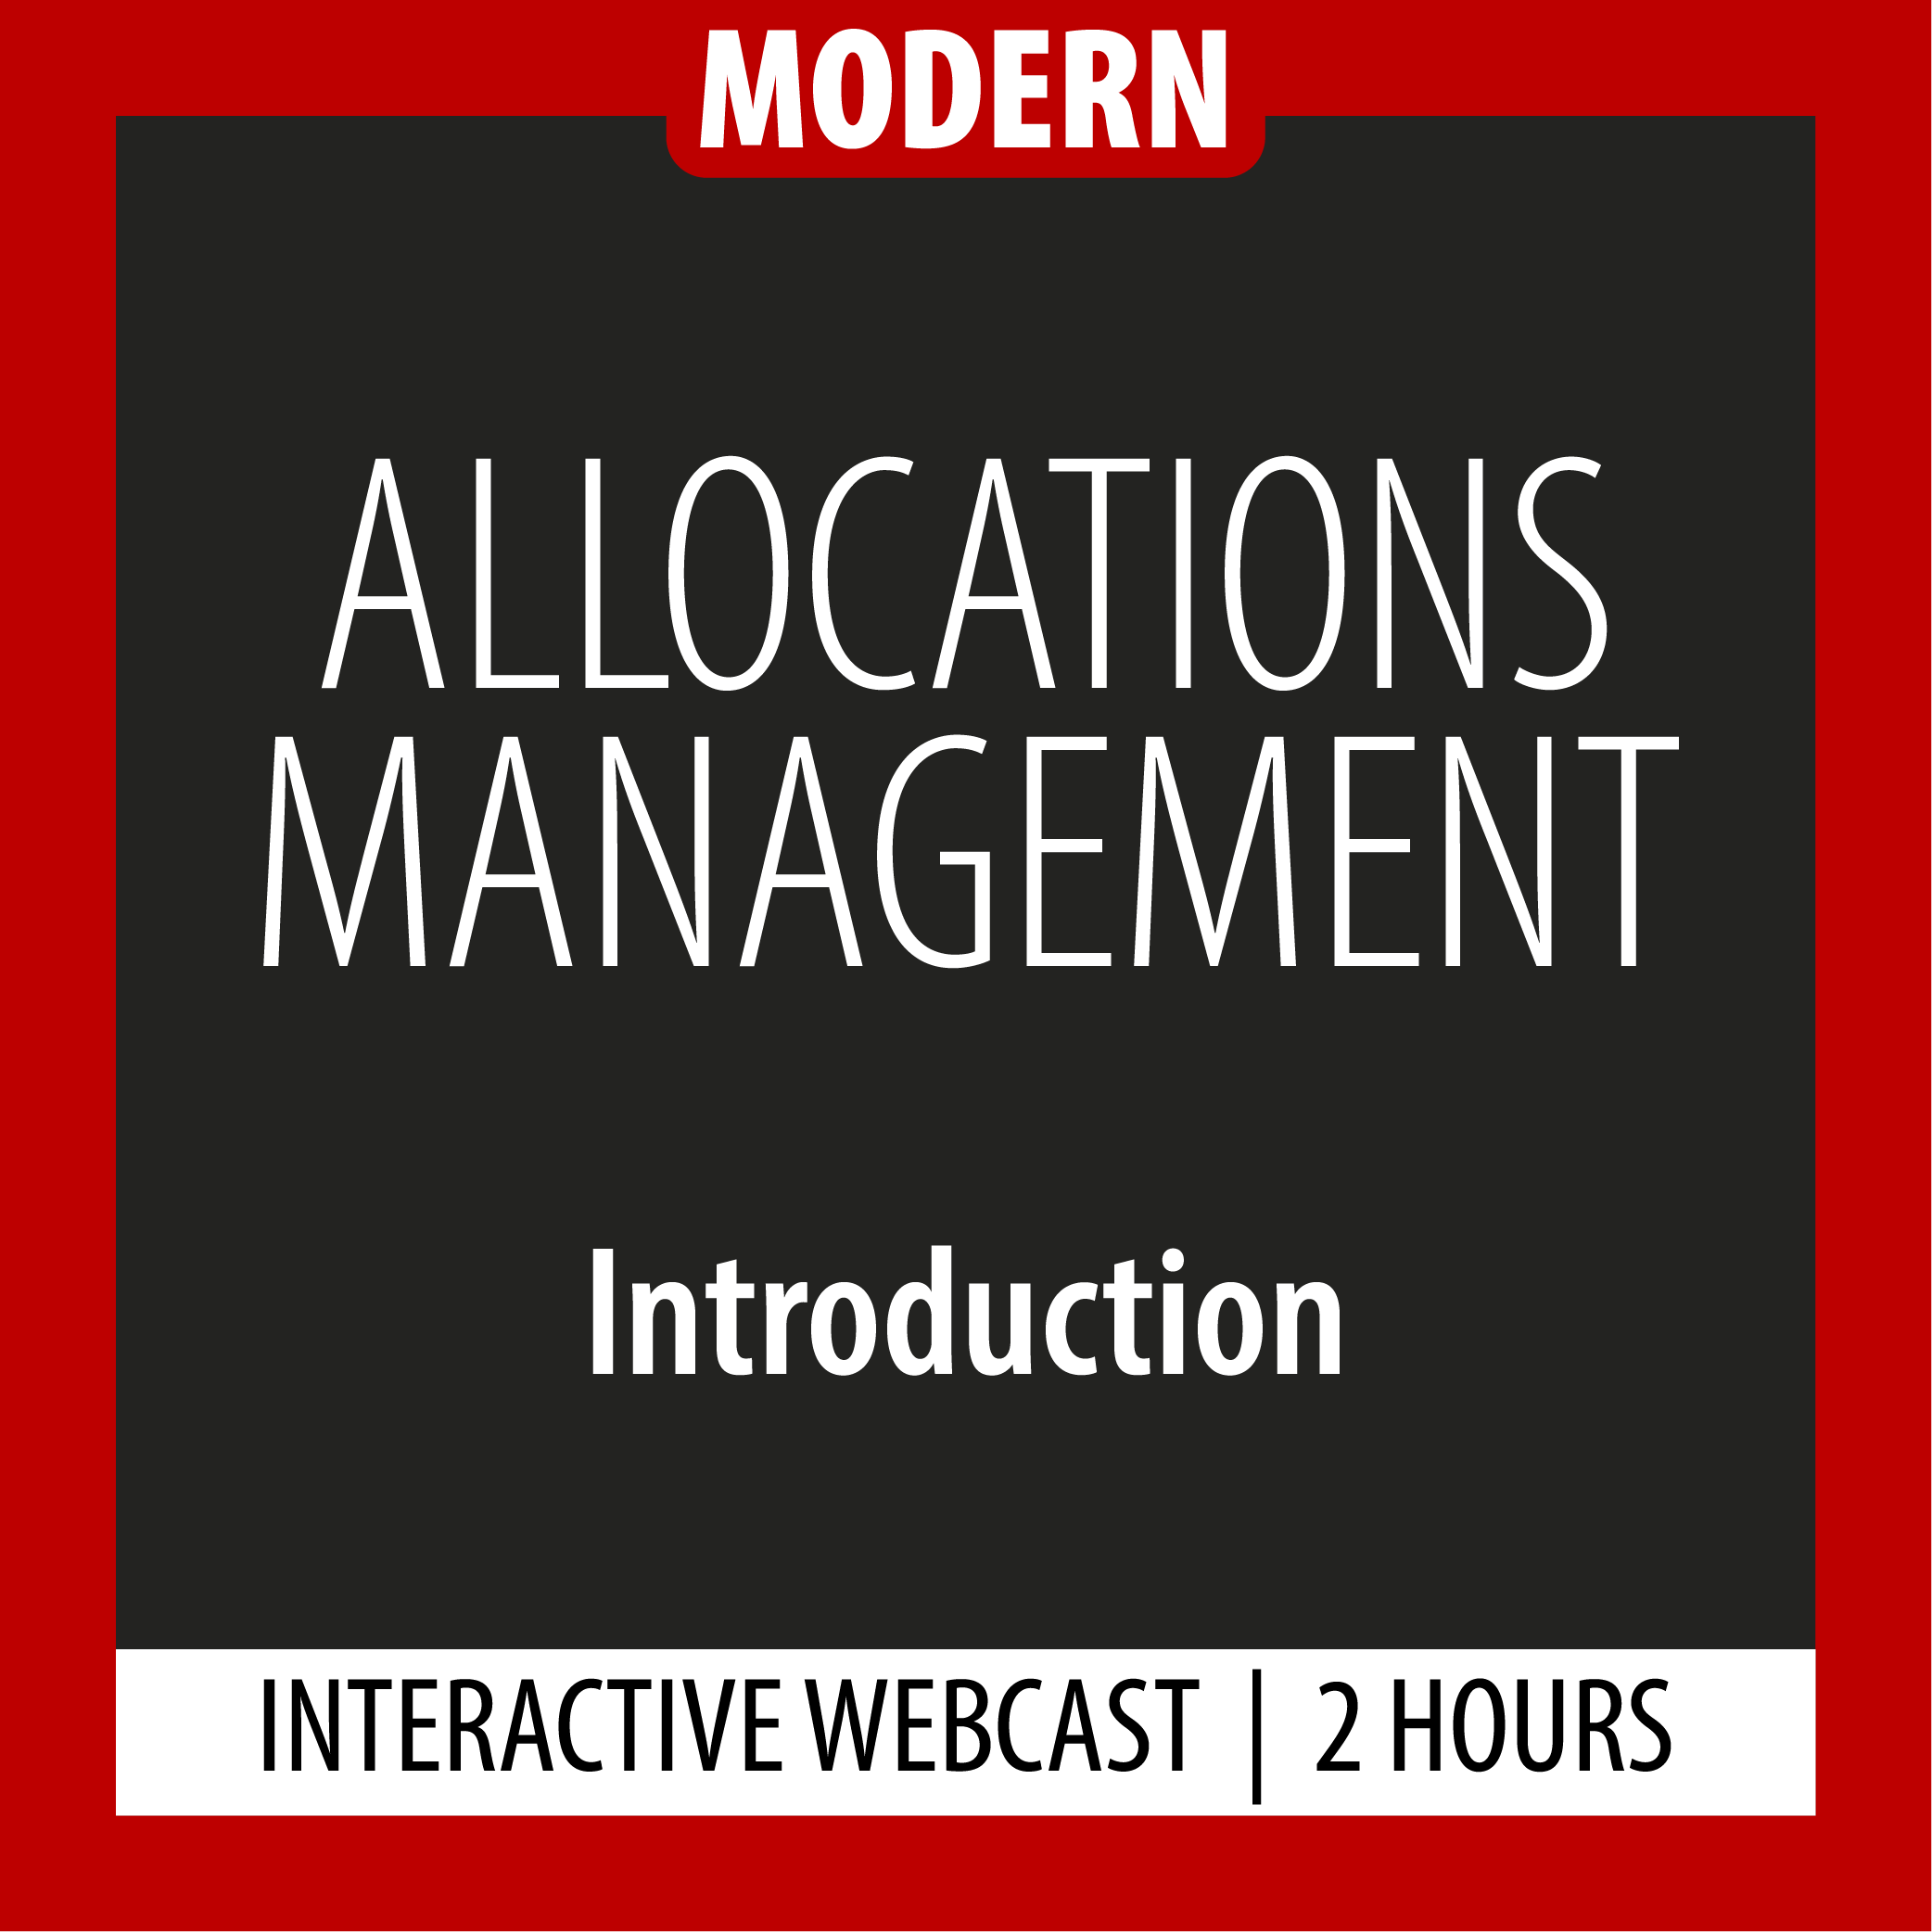 Modern - Allocations Management - Introduction - Webcast - 2 Hours